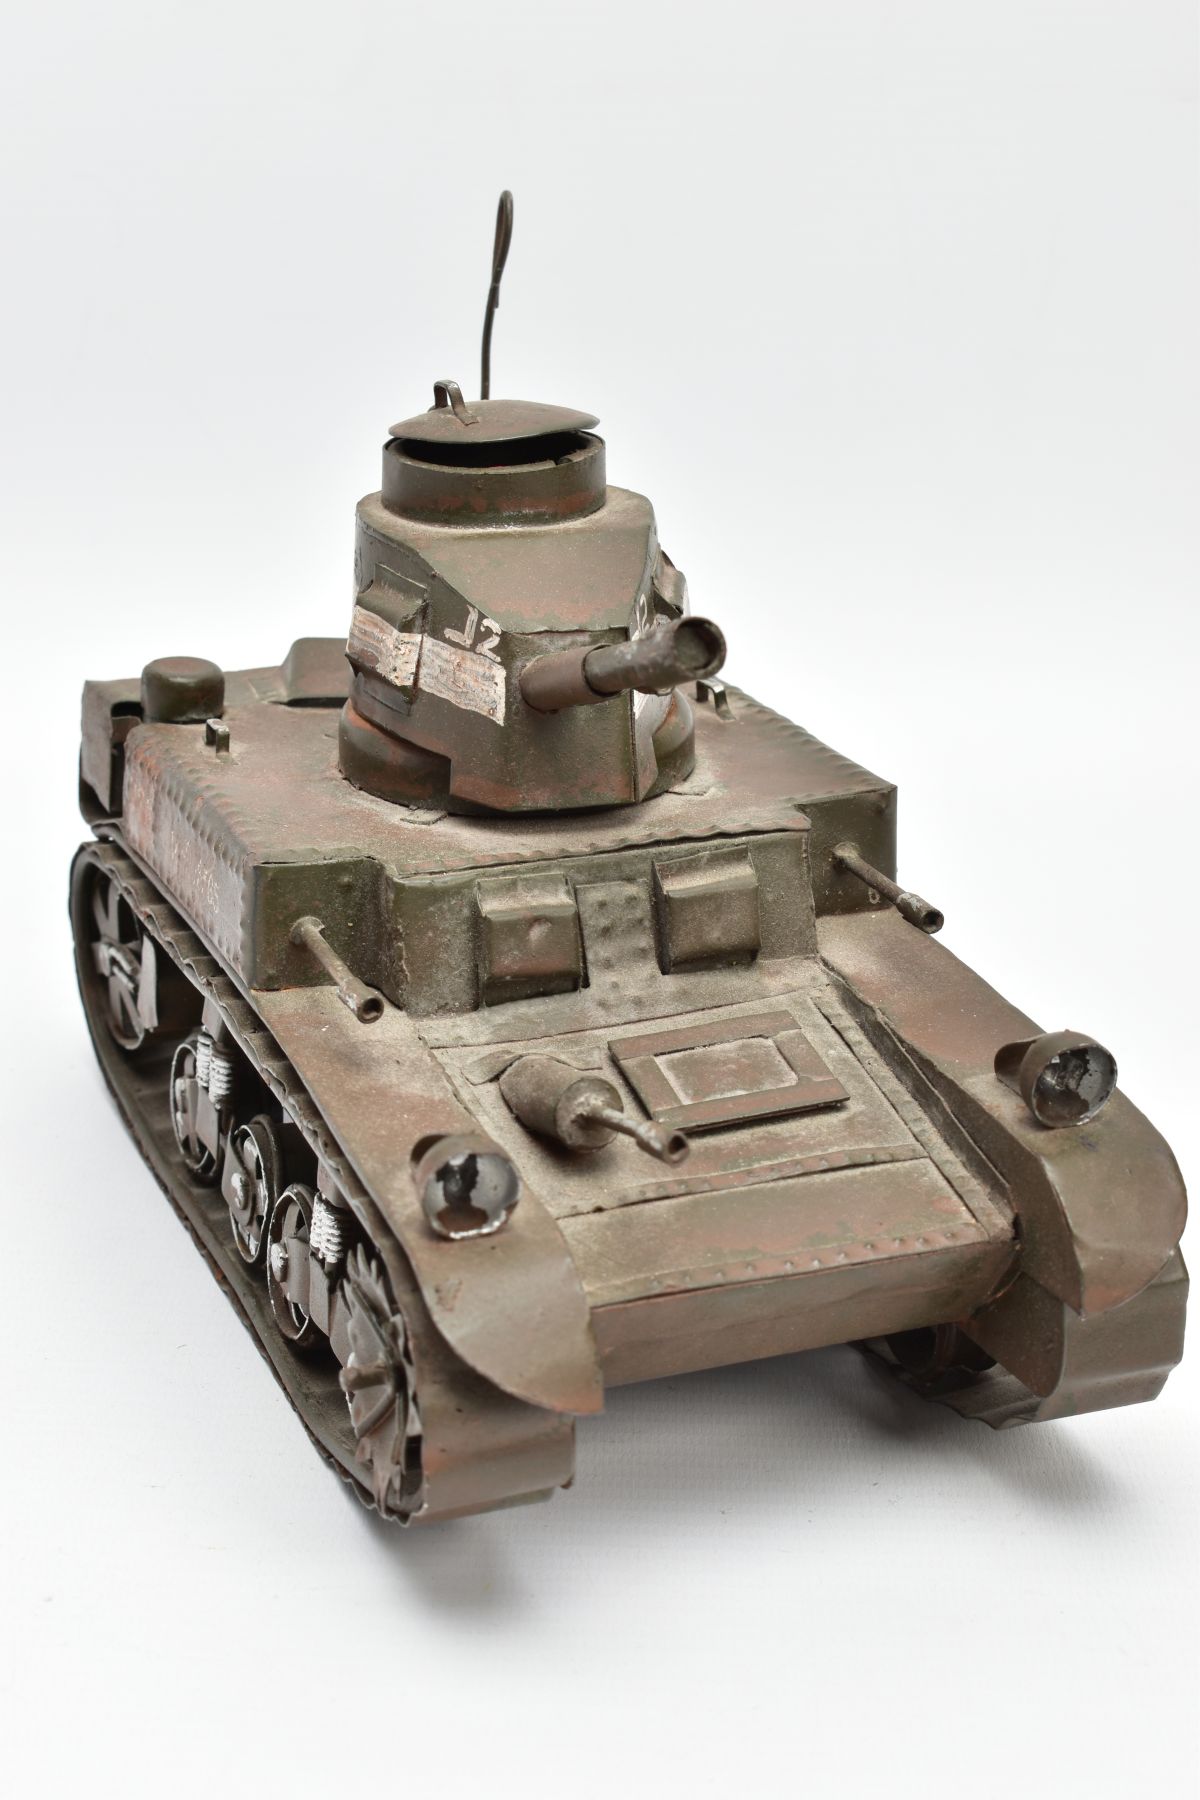 A SCRATCH HANDBUILT METAL MODEL, of a WWII period US Tank, in the style of an M3 Stuart tank, the - Image 2 of 7